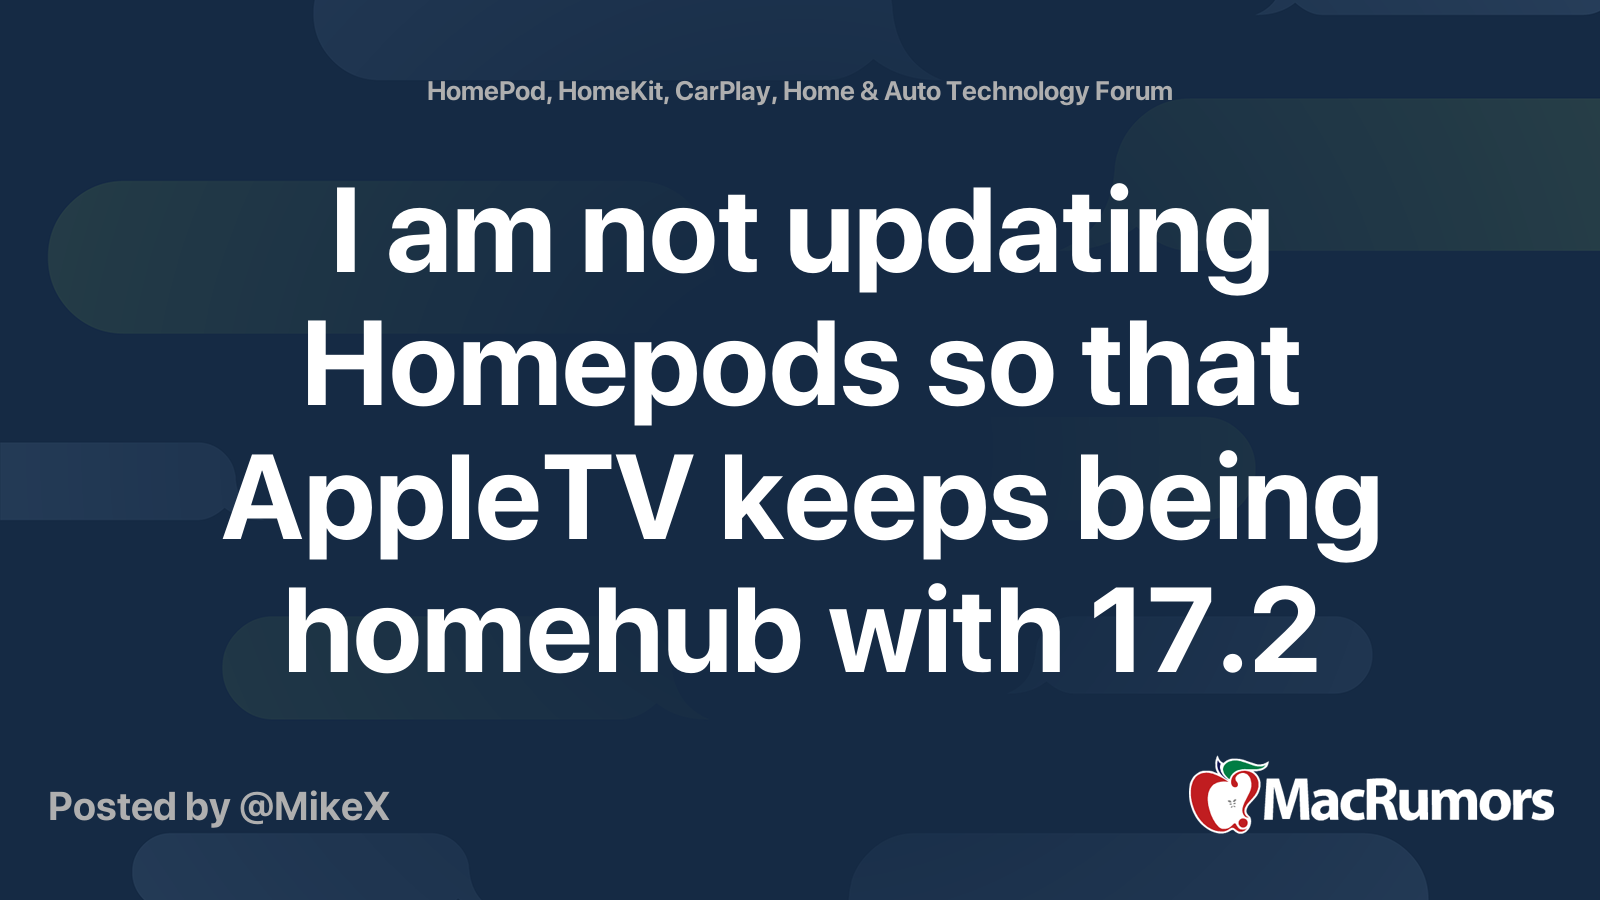 I am now convinced the HomeKit team are the rejects that weren't